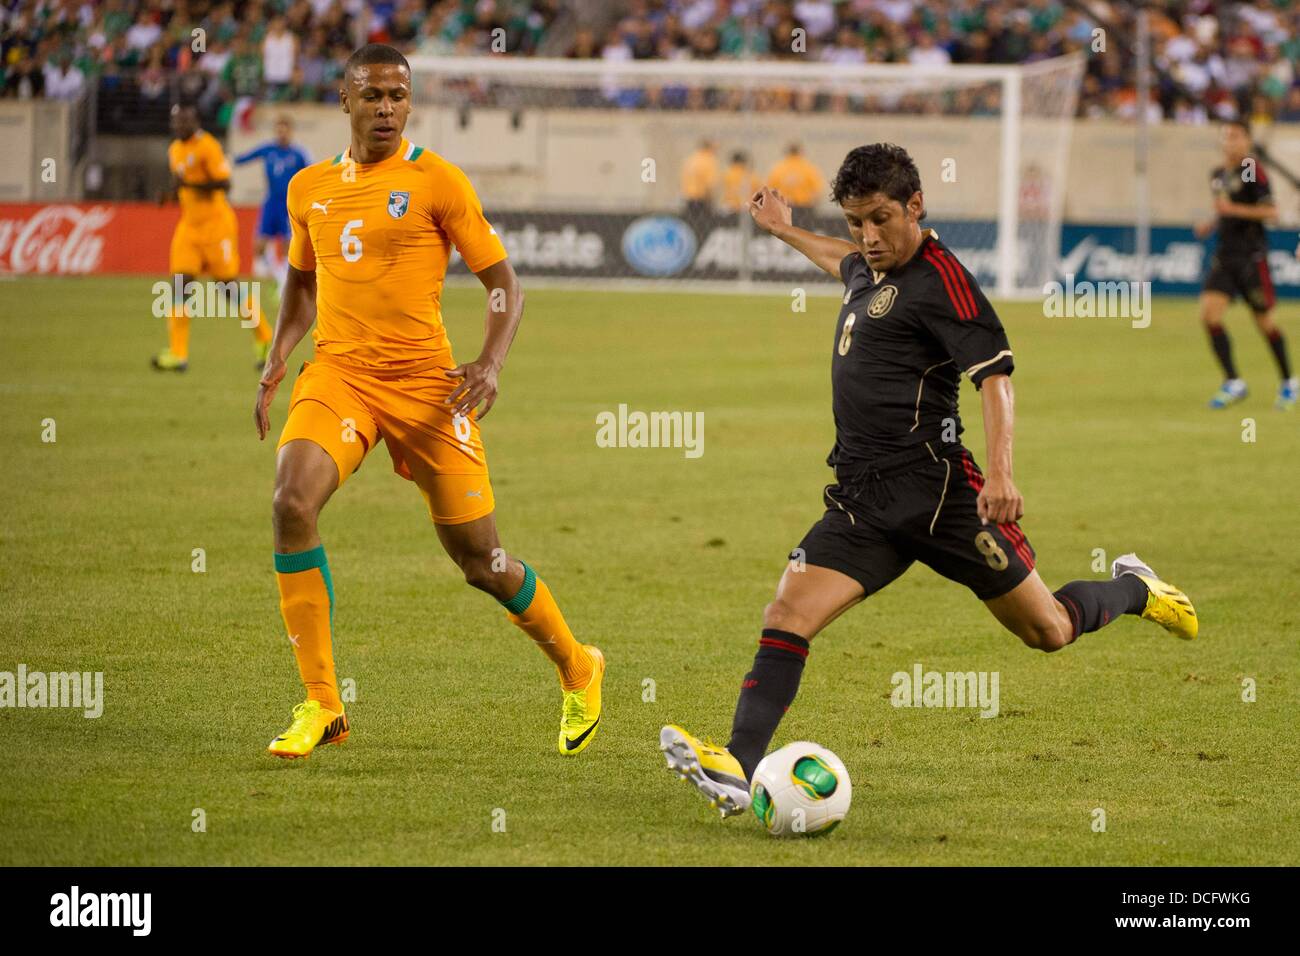 Aug. 14, 2013 - East Rutherford, New Jersey, U.S - August 14, 2013: Mexico National Team midfielder Angel Reyna (8) takes a shot in front of Ivory Coast National Team forward Mathis Bolly (6) during the International friendly match between Mexico and Ivory Coast at Met Life Stadium, East Rutherford, NJ. Stock Photo